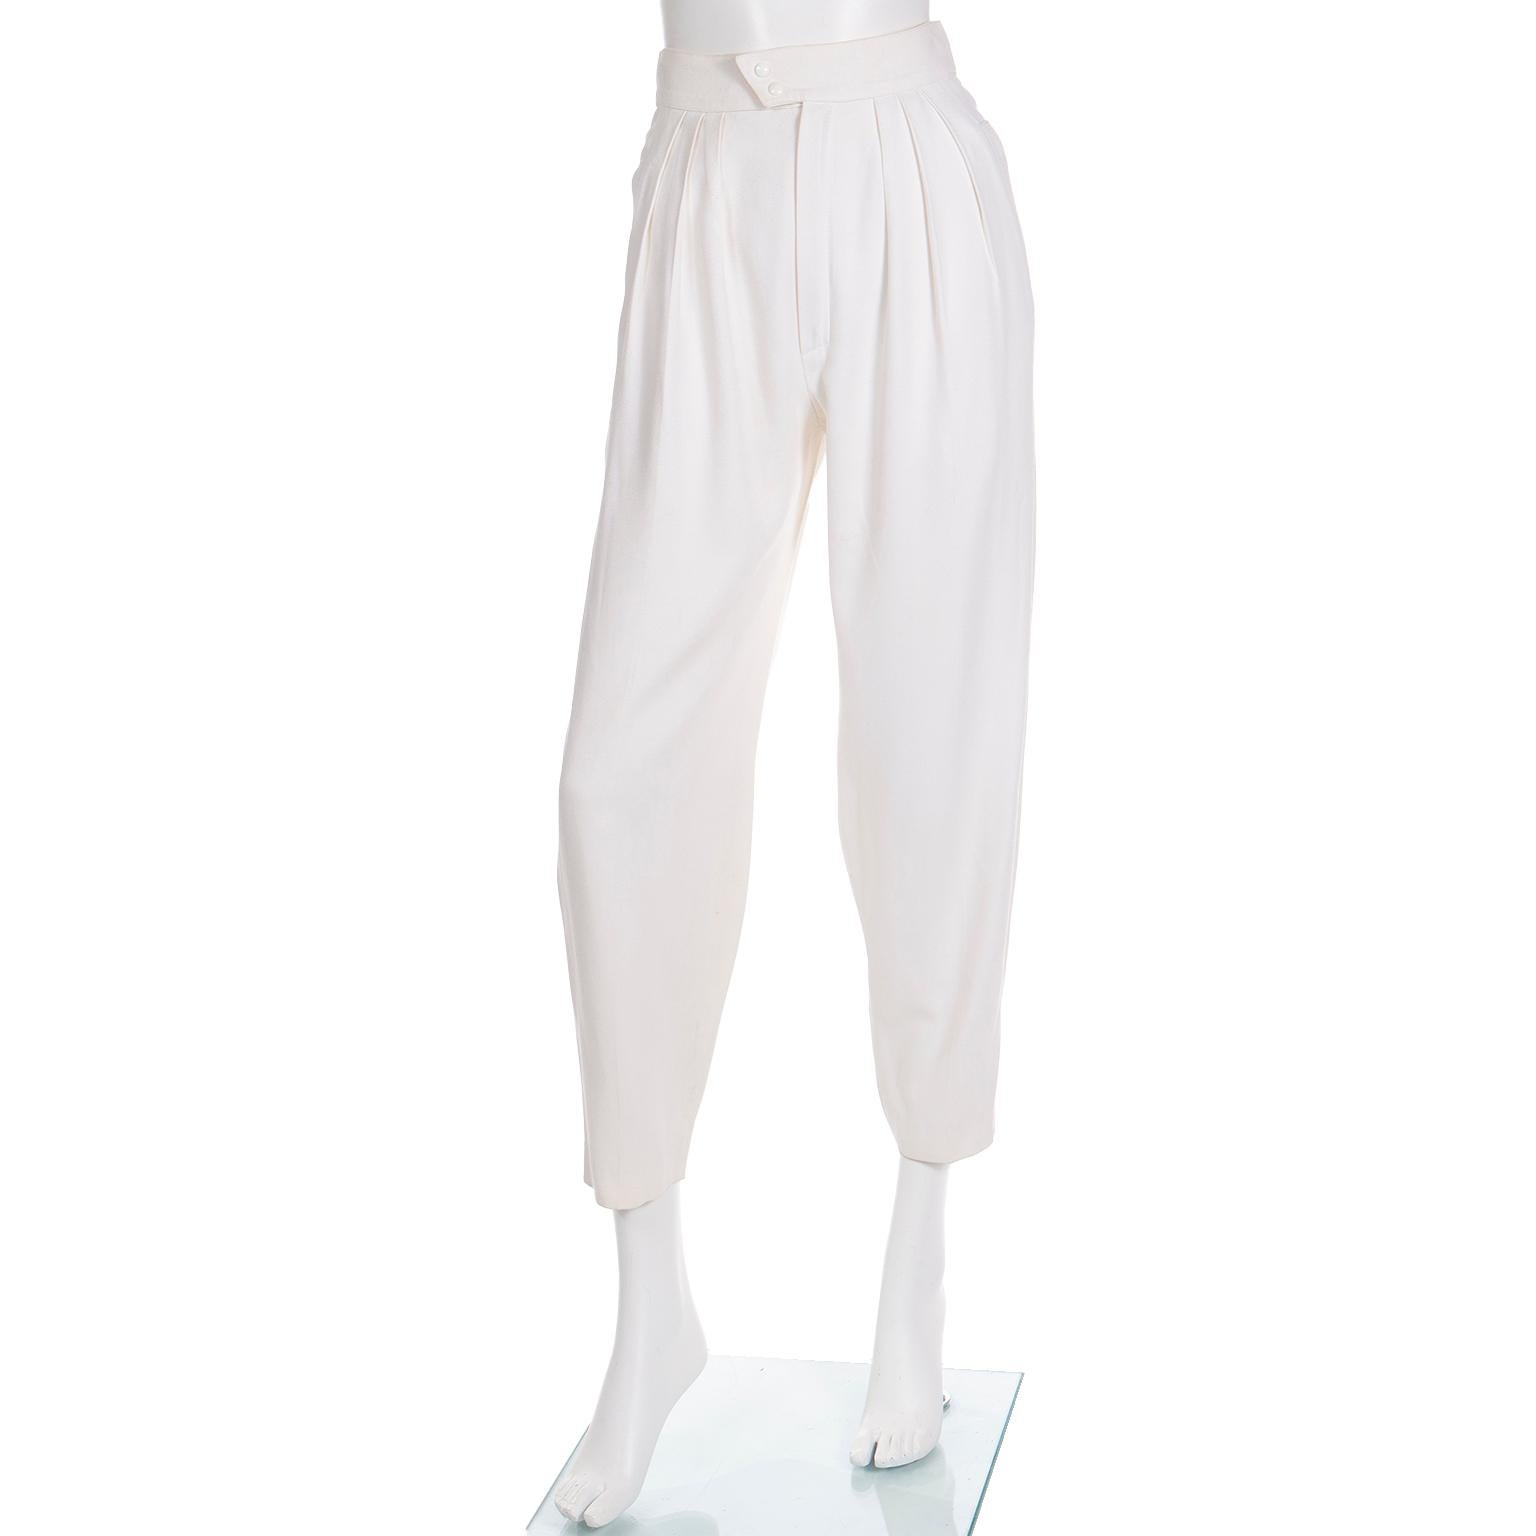 Thierry Mugler Vintage White 2 Pc Suit Jacket & Trousers Outfit  For Sale 4